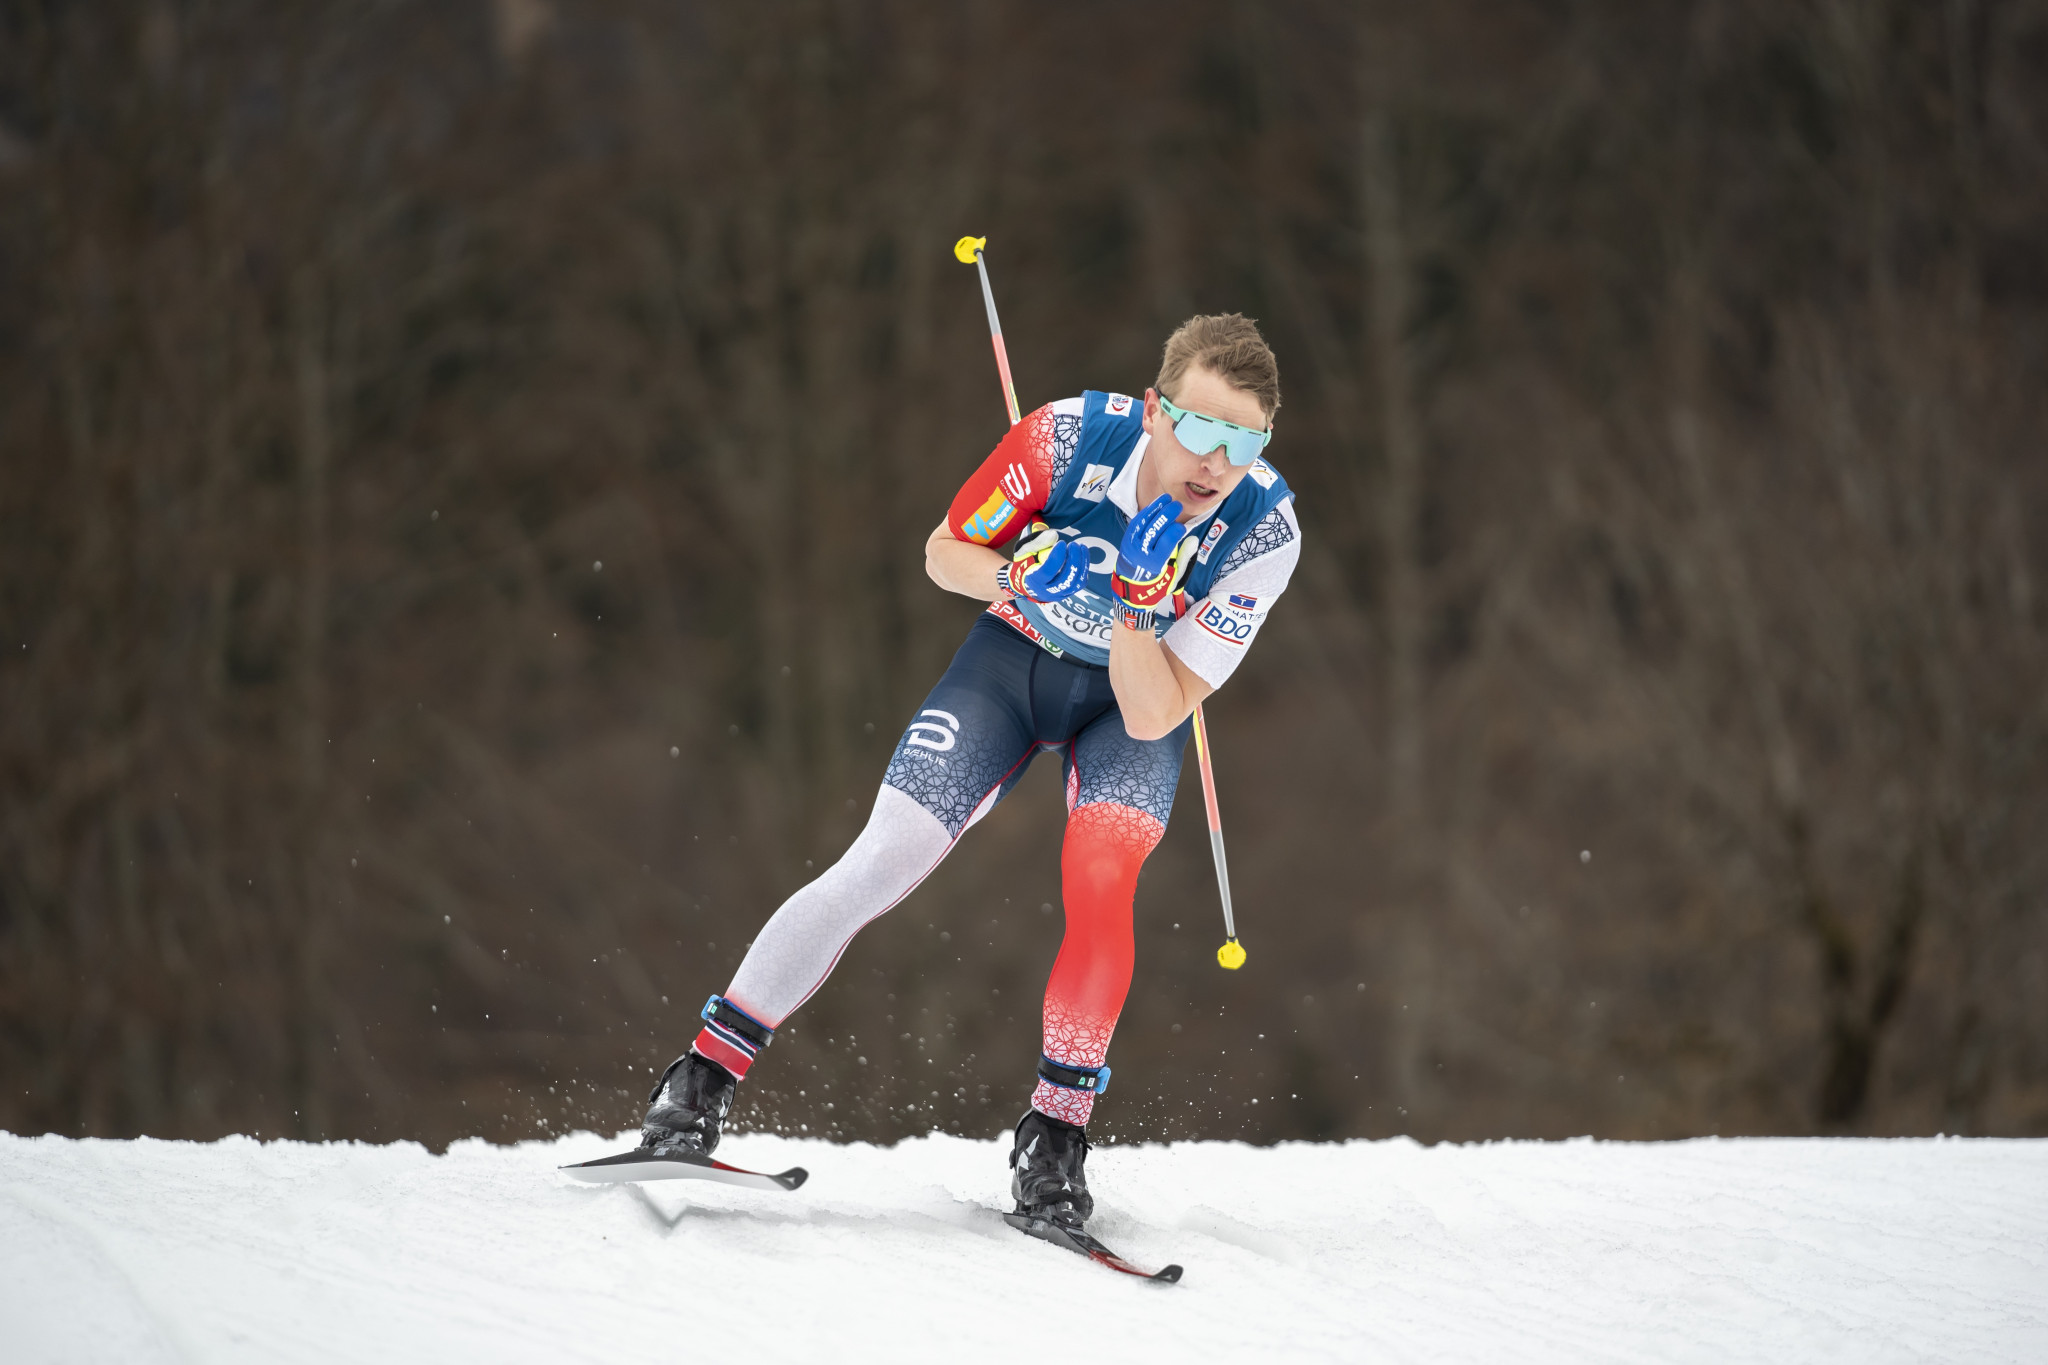 Simen Hegstad Krüger has become the latest Norwegian cross-country skier to test positive for coronavirus ©Getty Images